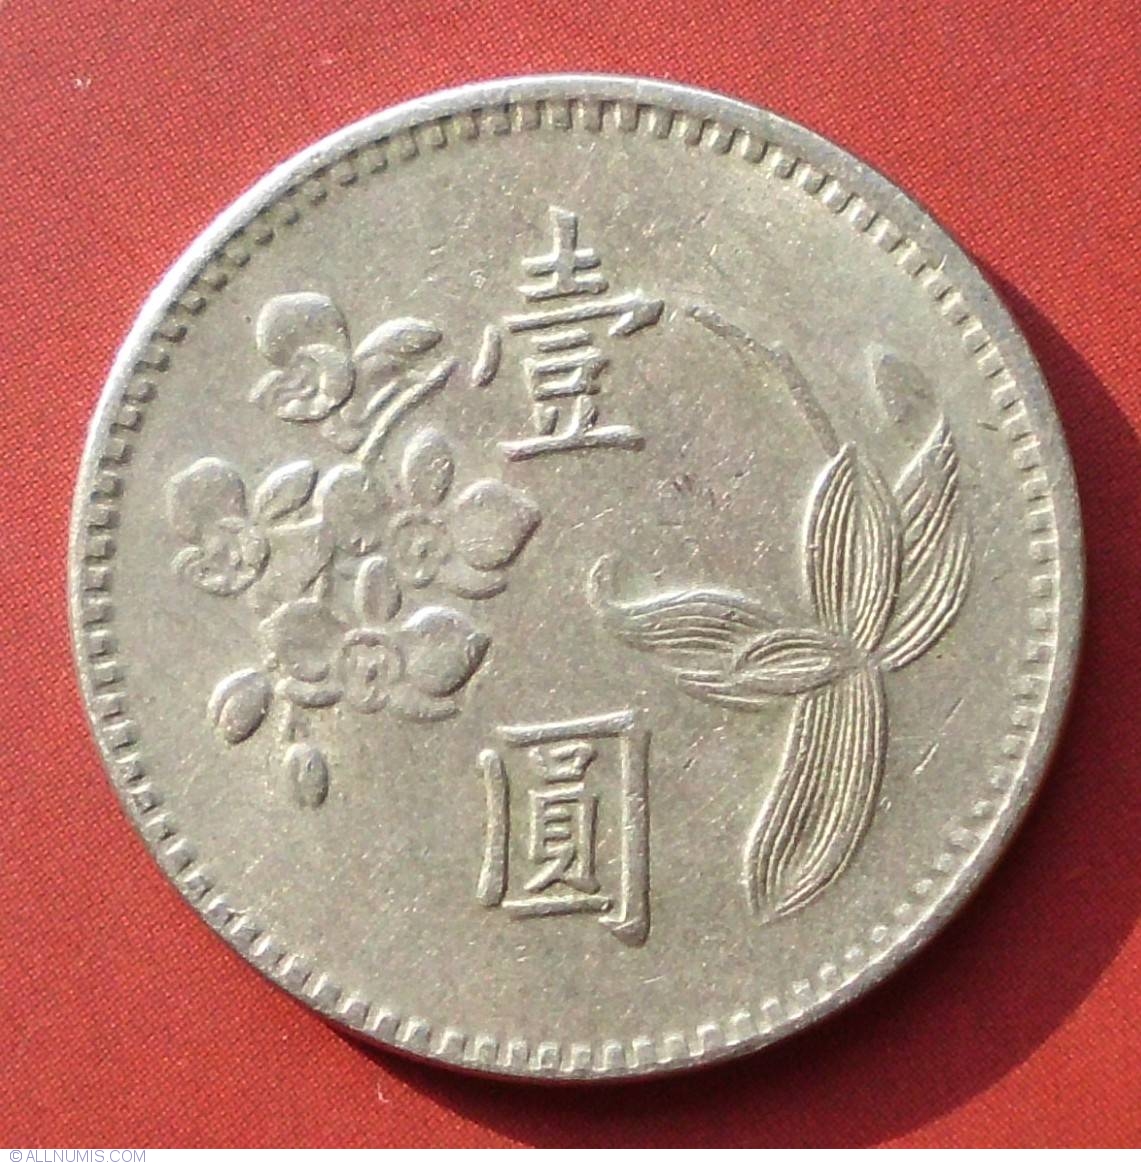 Coin of 1 Yuan 1972 from Taiwan (Republic of China) - ID 26361